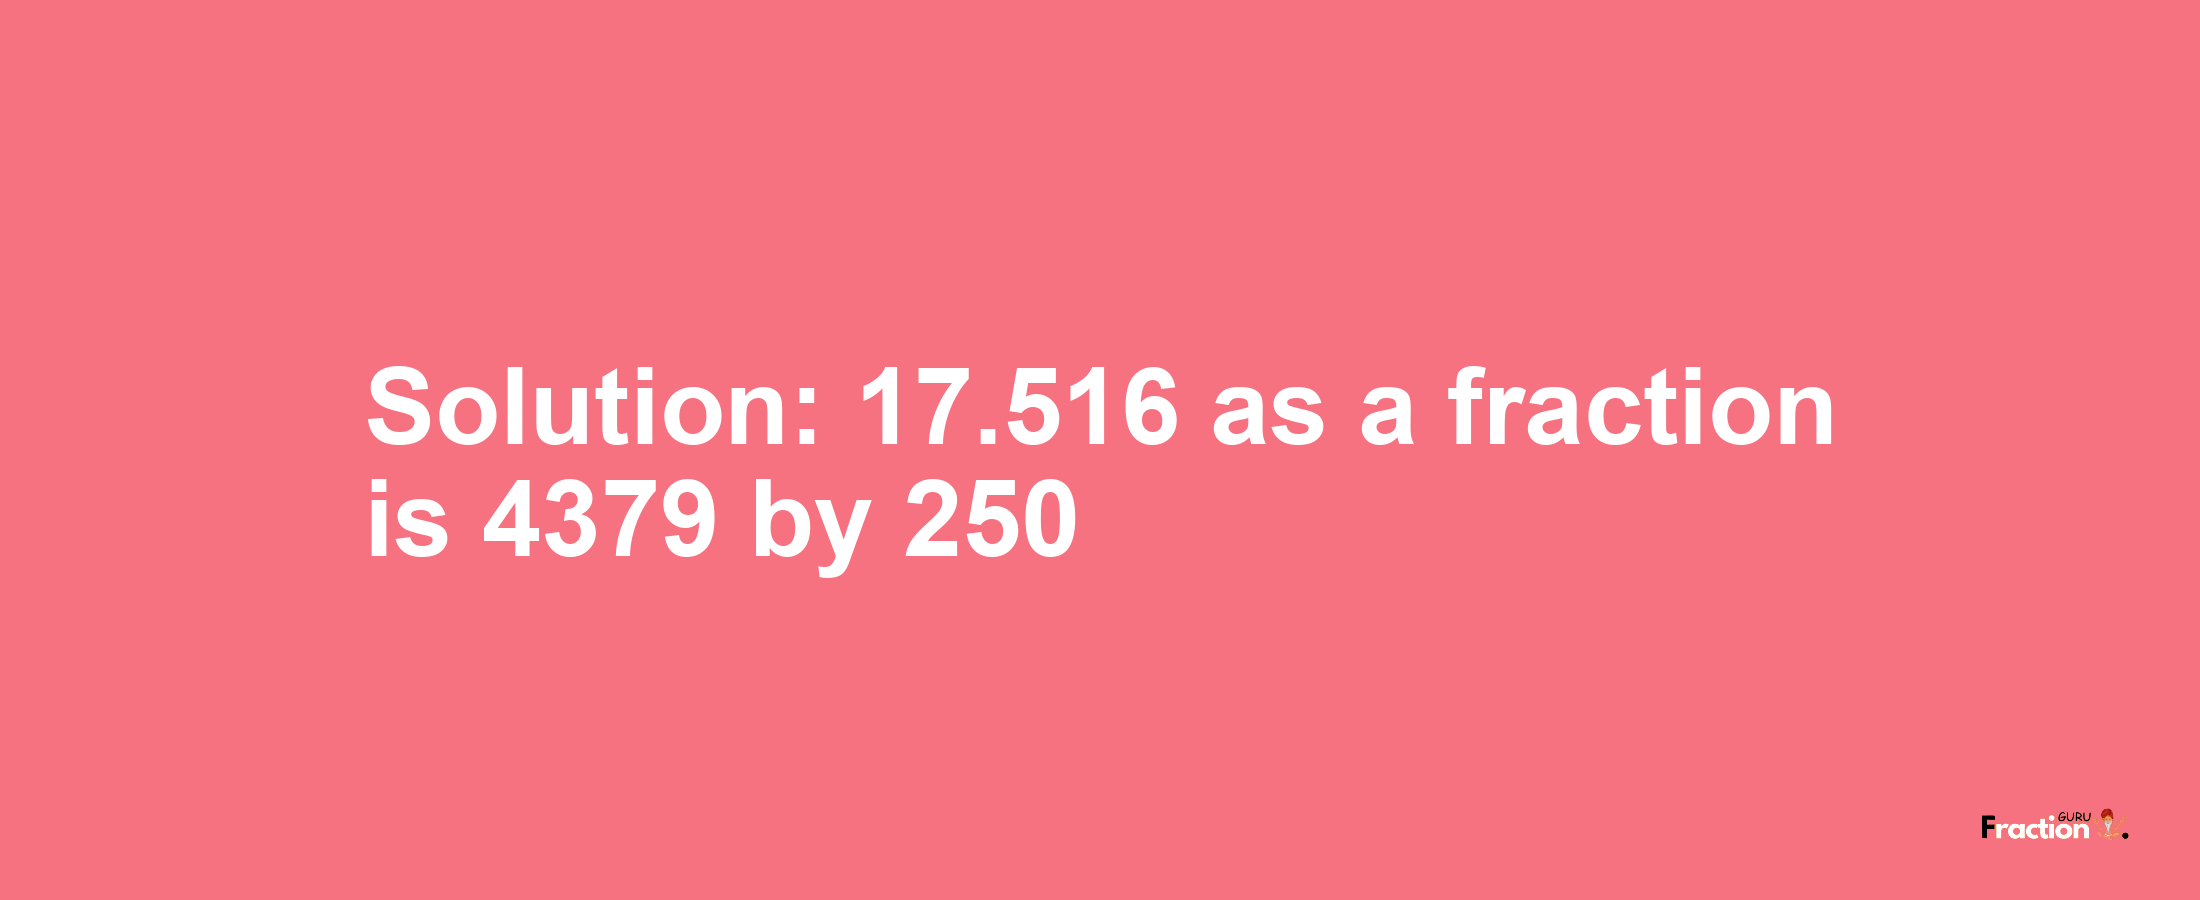 Solution:17.516 as a fraction is 4379/250